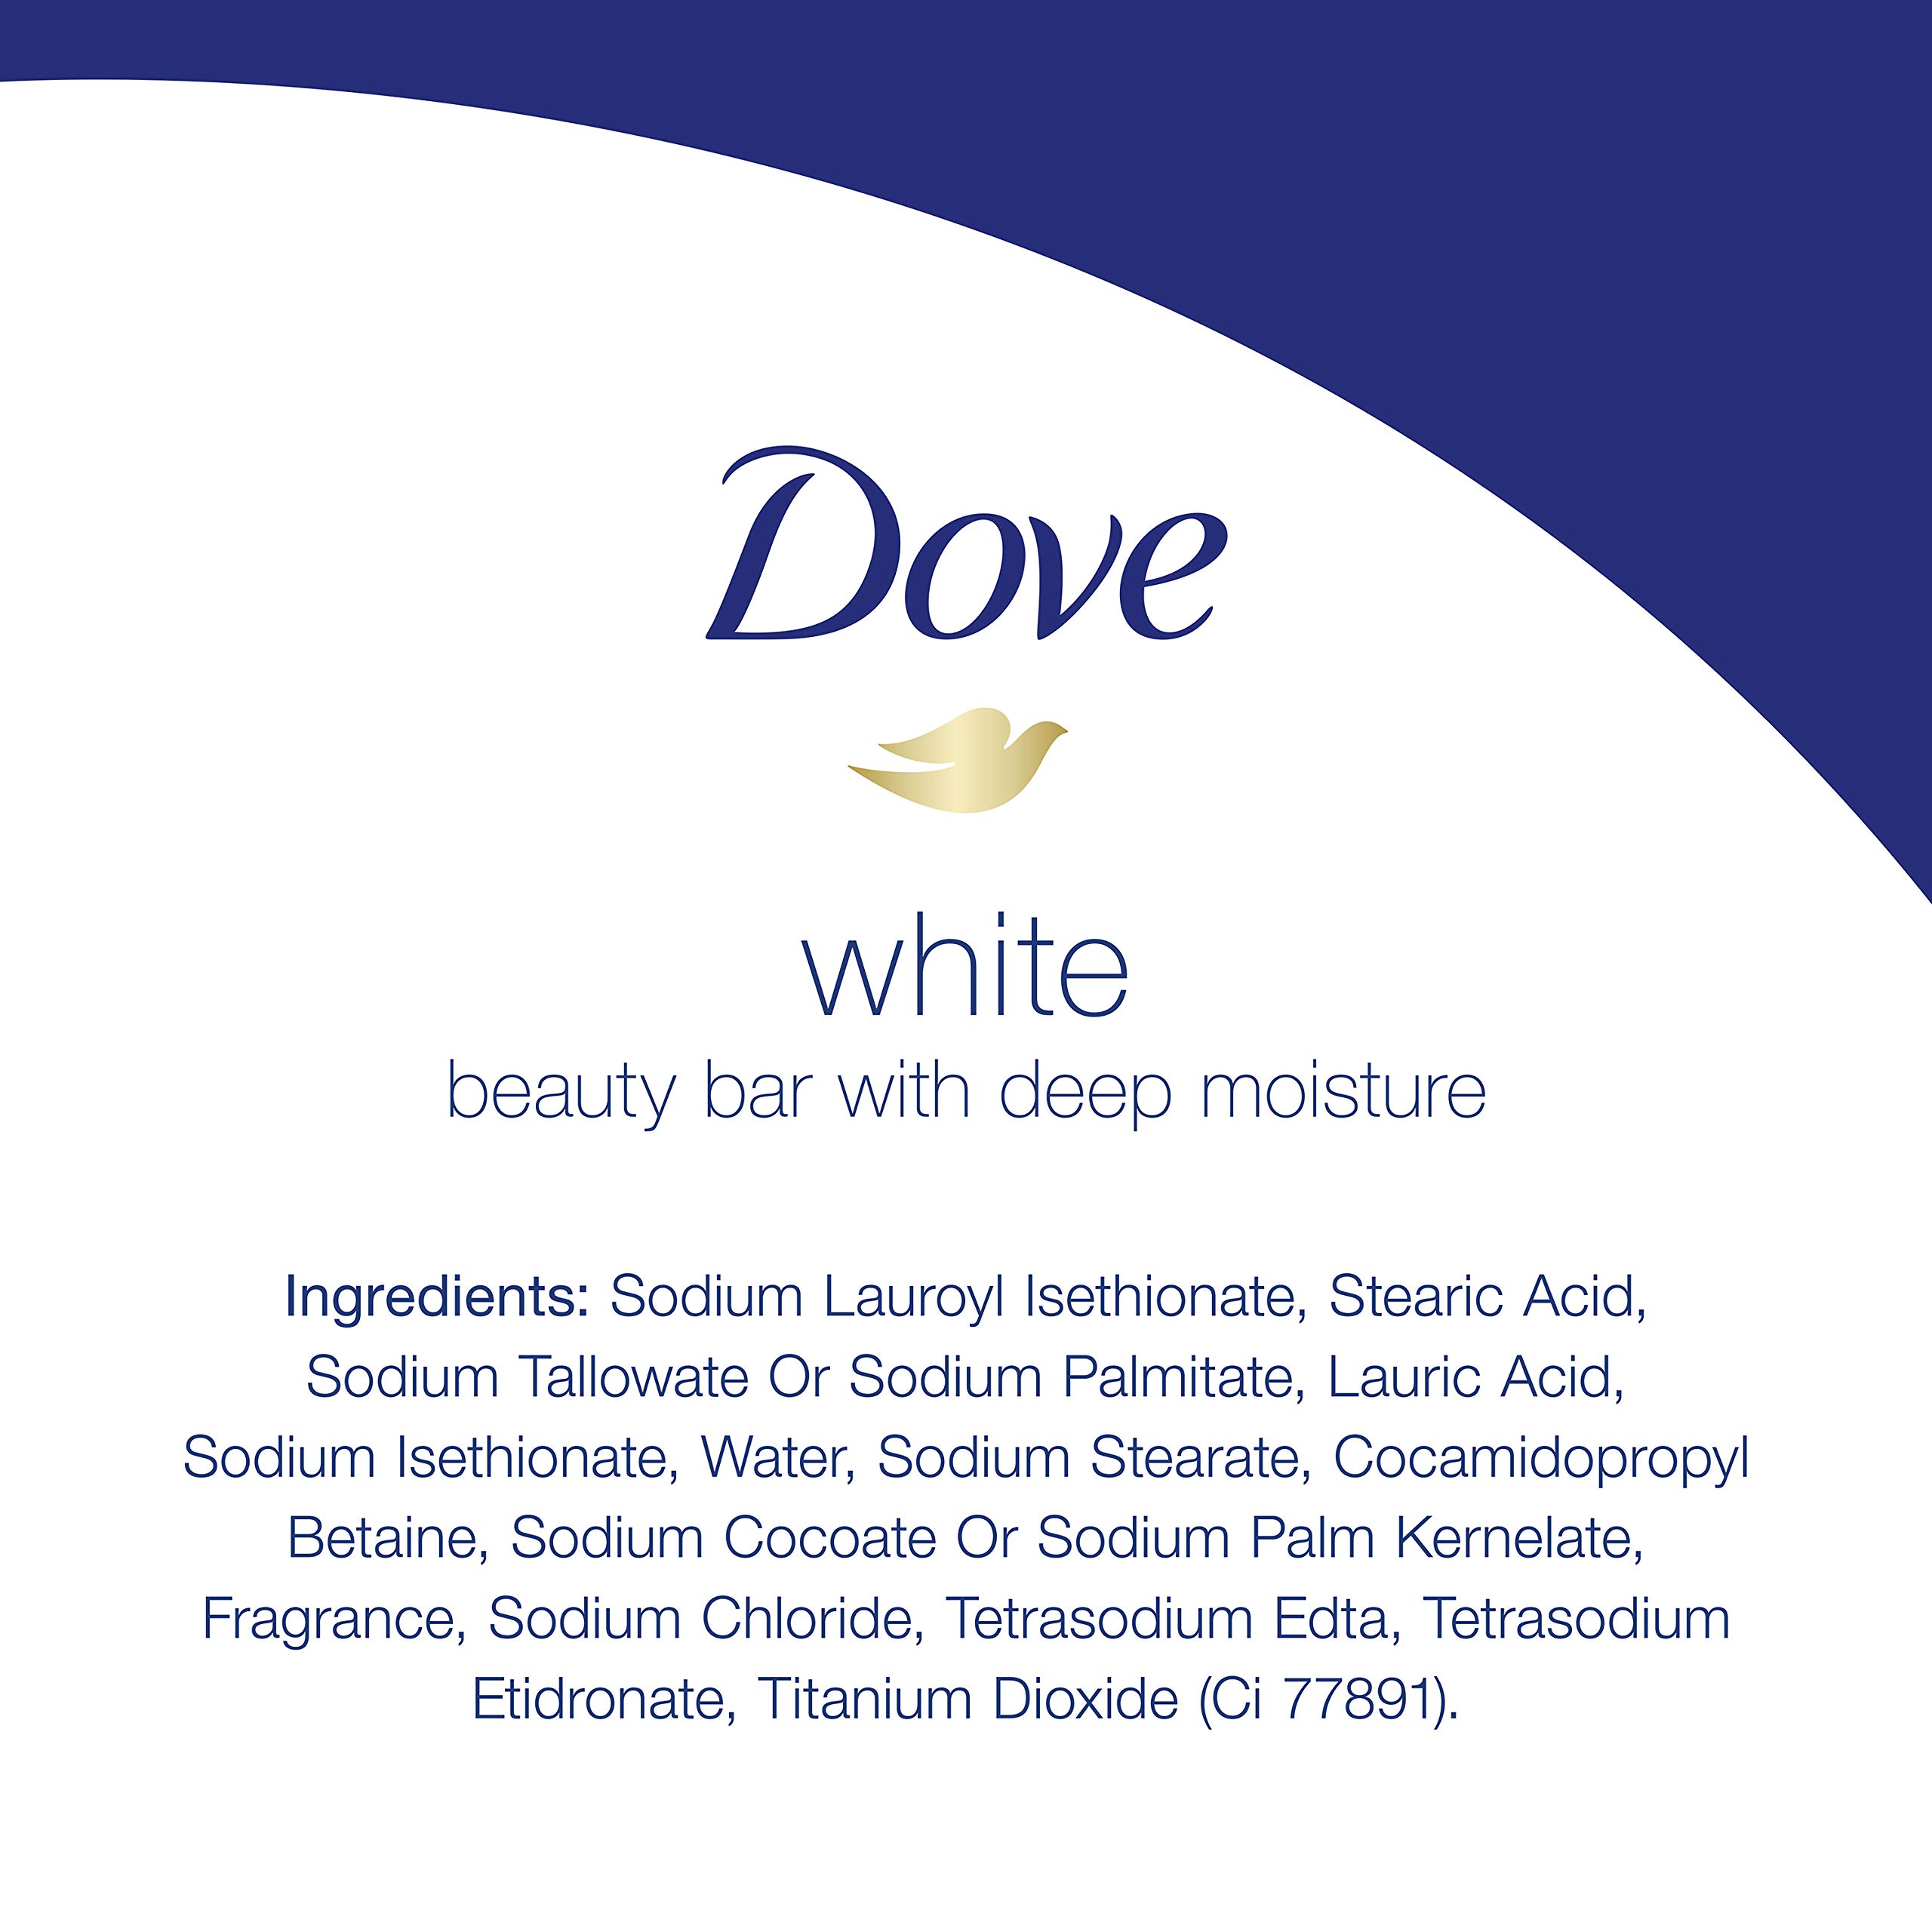 Dove Beauty Bar Gentle Cleanser for Softer and Smoother Skin with 1/4 Moisturizing Cream White More Moisturizing than Bar Soap, 3.75 oz, 14 Bars